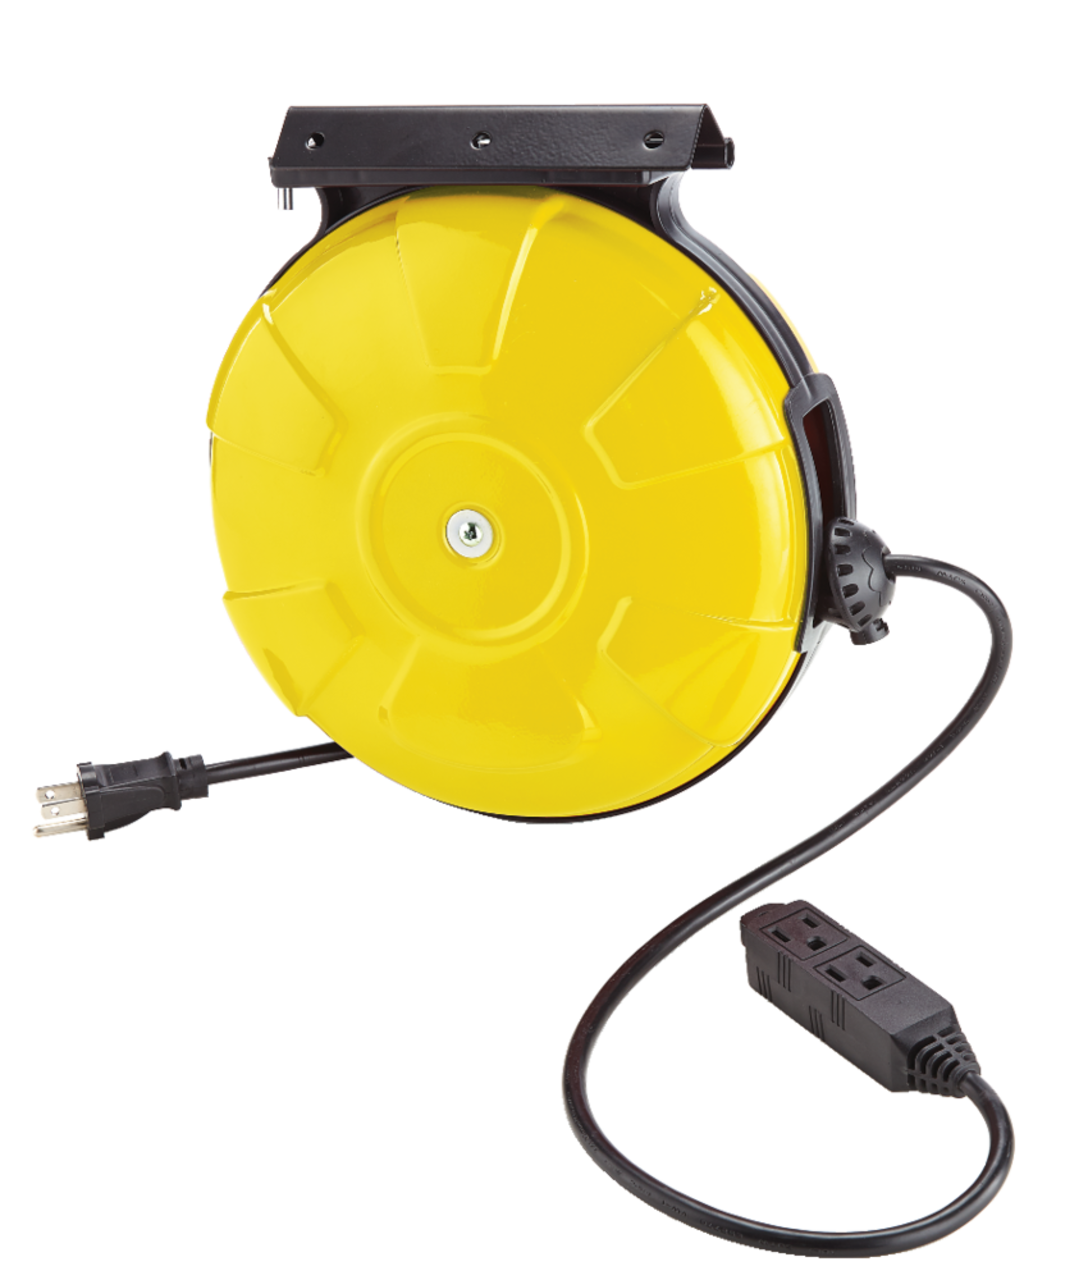 30Ft Retractable Extension Cord Reel with Breaker Switch & 3 Electrica -  iron forge tools